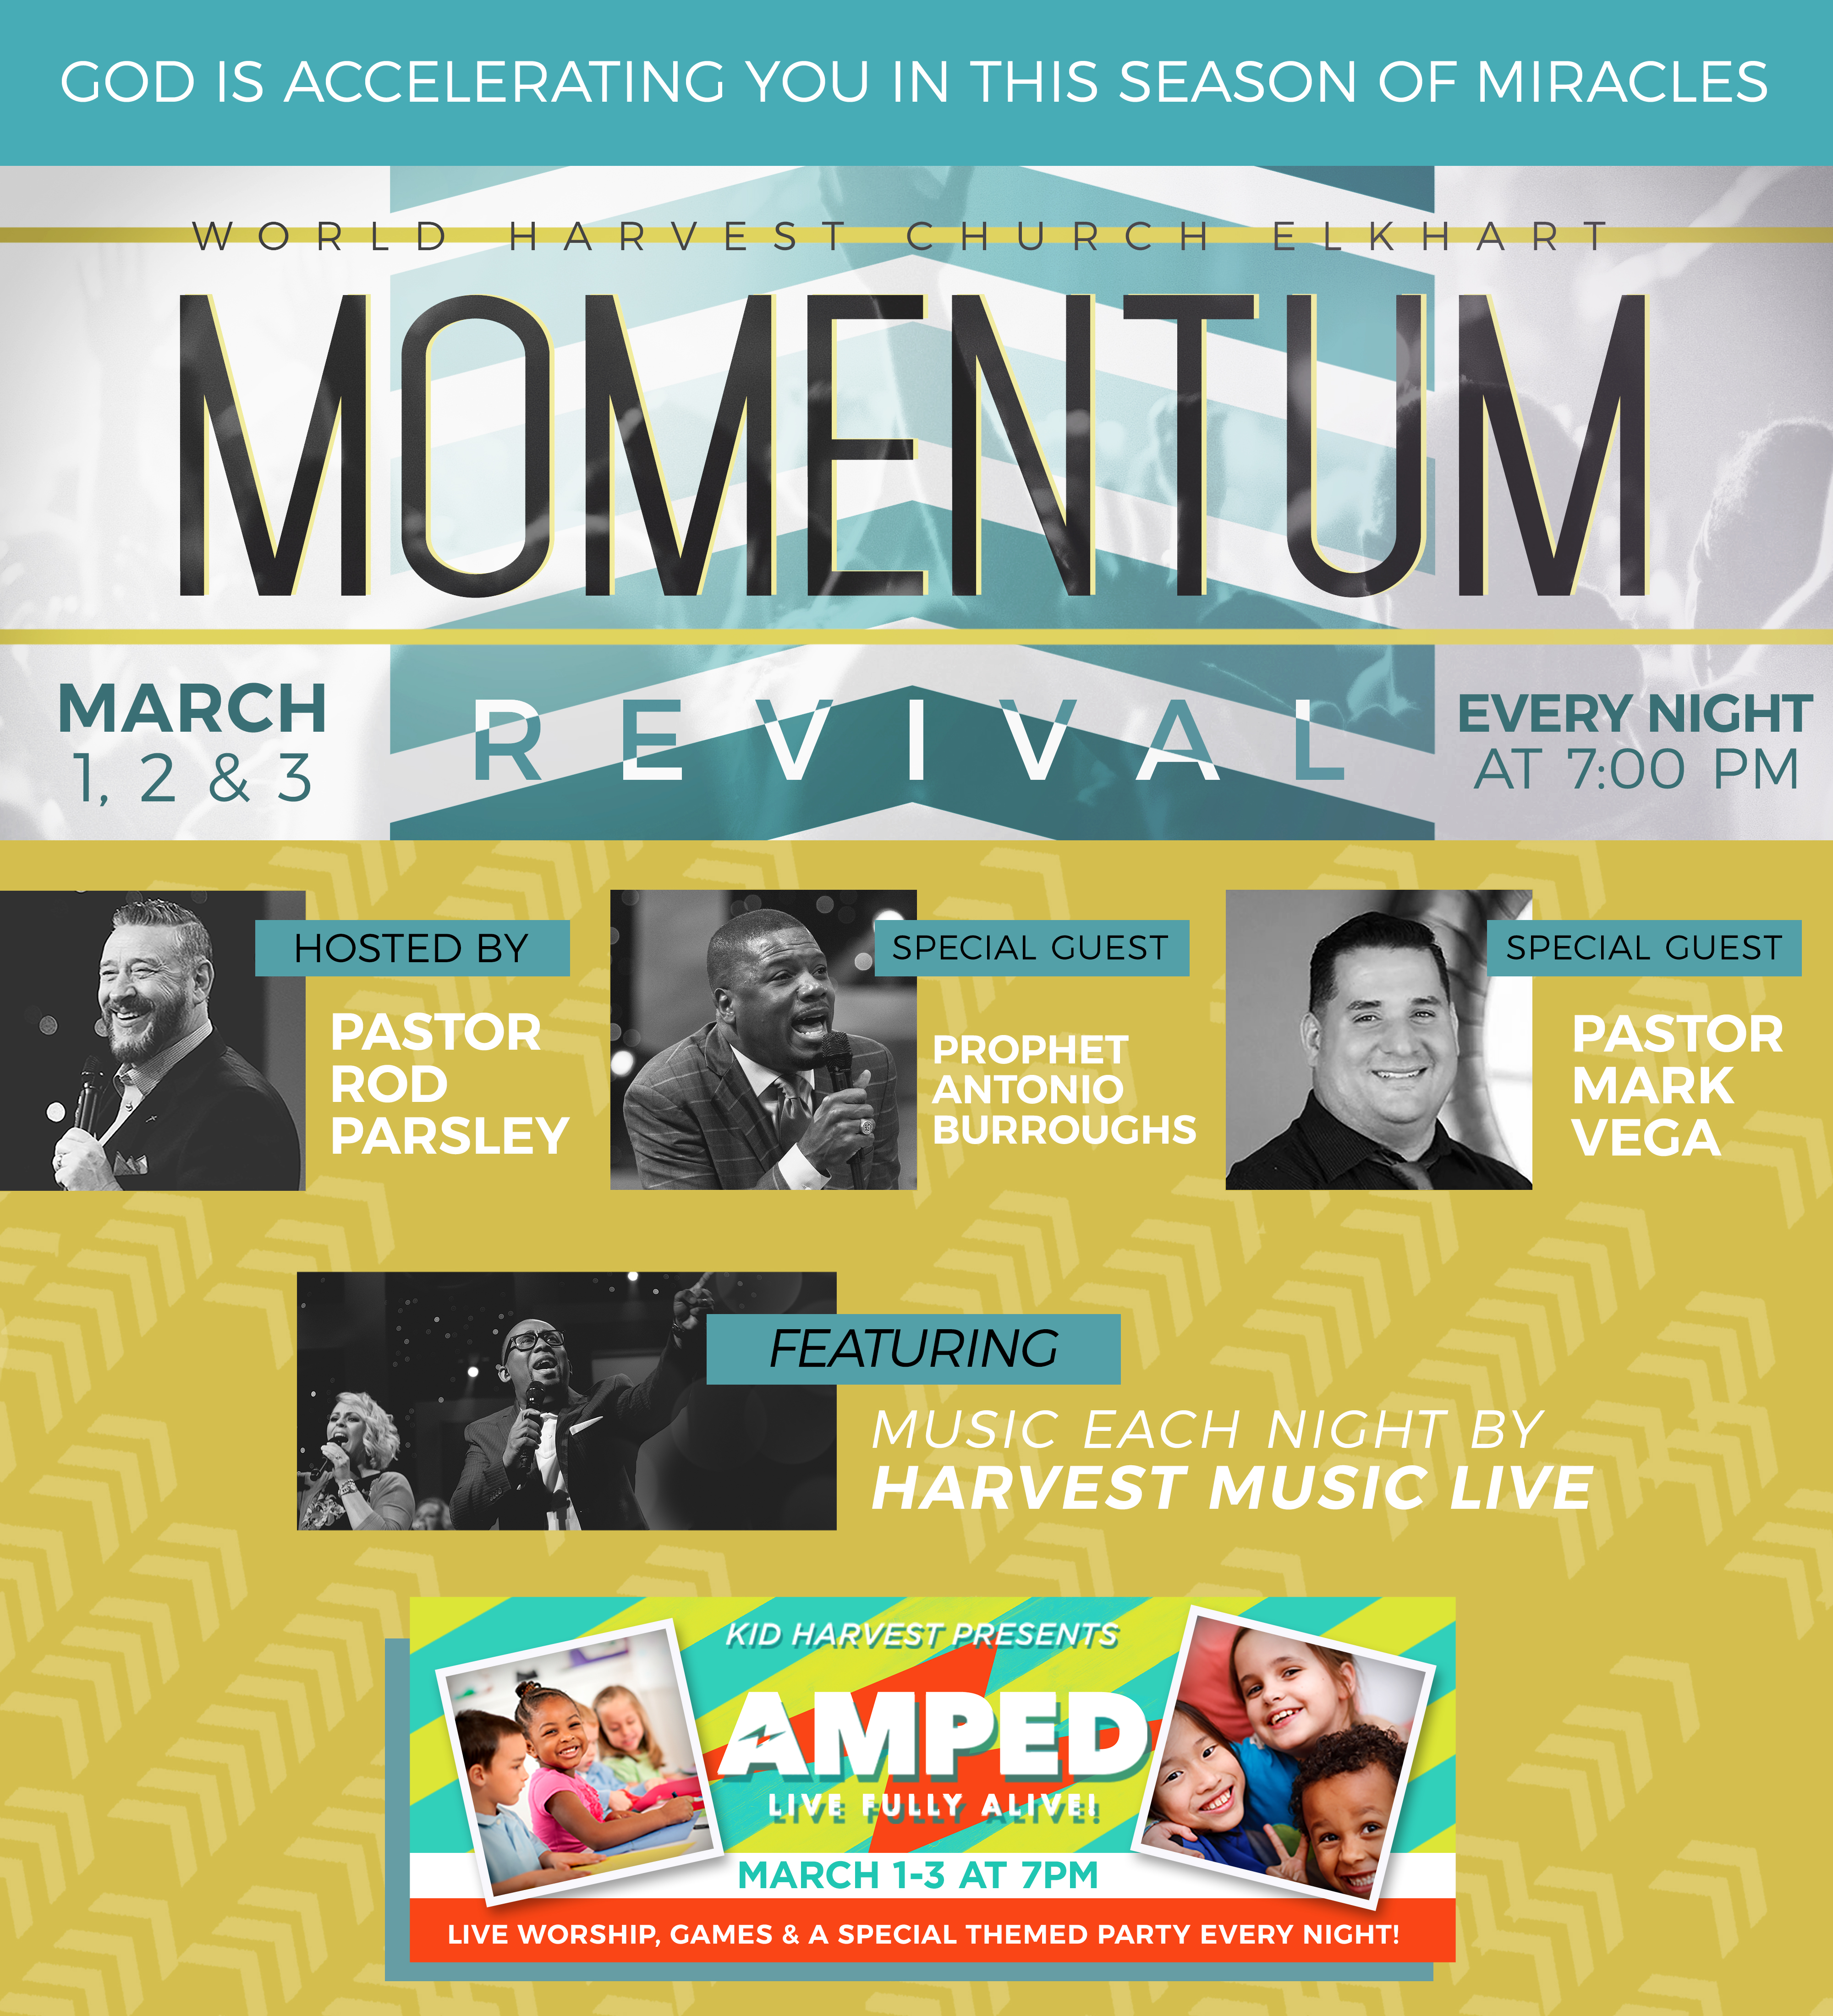 God is accelerating you in this season of miracles | World Harvest Church Elkhart - Momentum | Revival: March 1, 2 & 3 - Every night at 7:00PM | Hosted By: Pastor Rod Parsley - Special Guest: Prophet Antonio Burroughs - Special Guest: Pastor Mark Vega - Featuring: Music each night by Harvest Music Live | Kid Harvest presents: Amped: Live Fully Alive! - March 1-3 at 7PM - Live Worship, games G& A Special Themed Party every night!